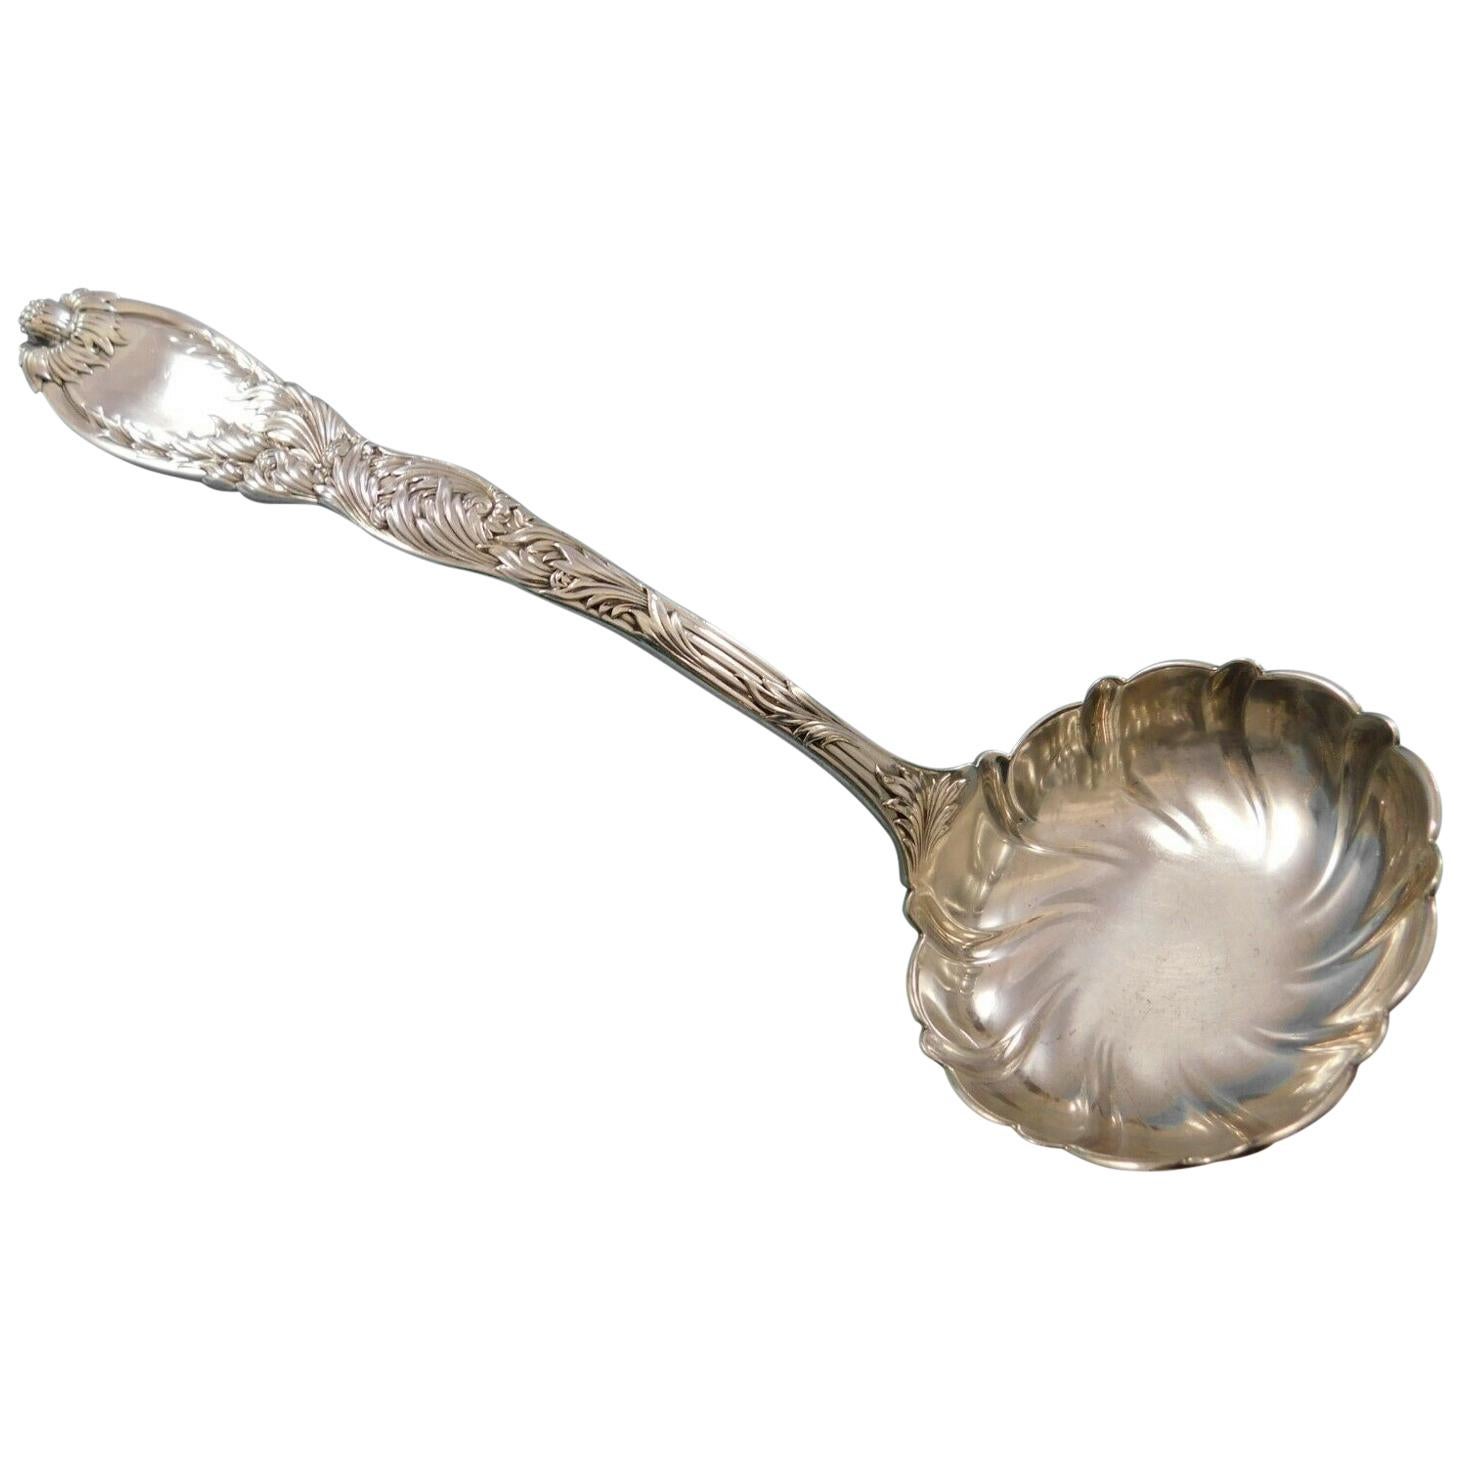 Chrysanthemum by Tiffany & Co. Sterling Silver Oyster Ladle